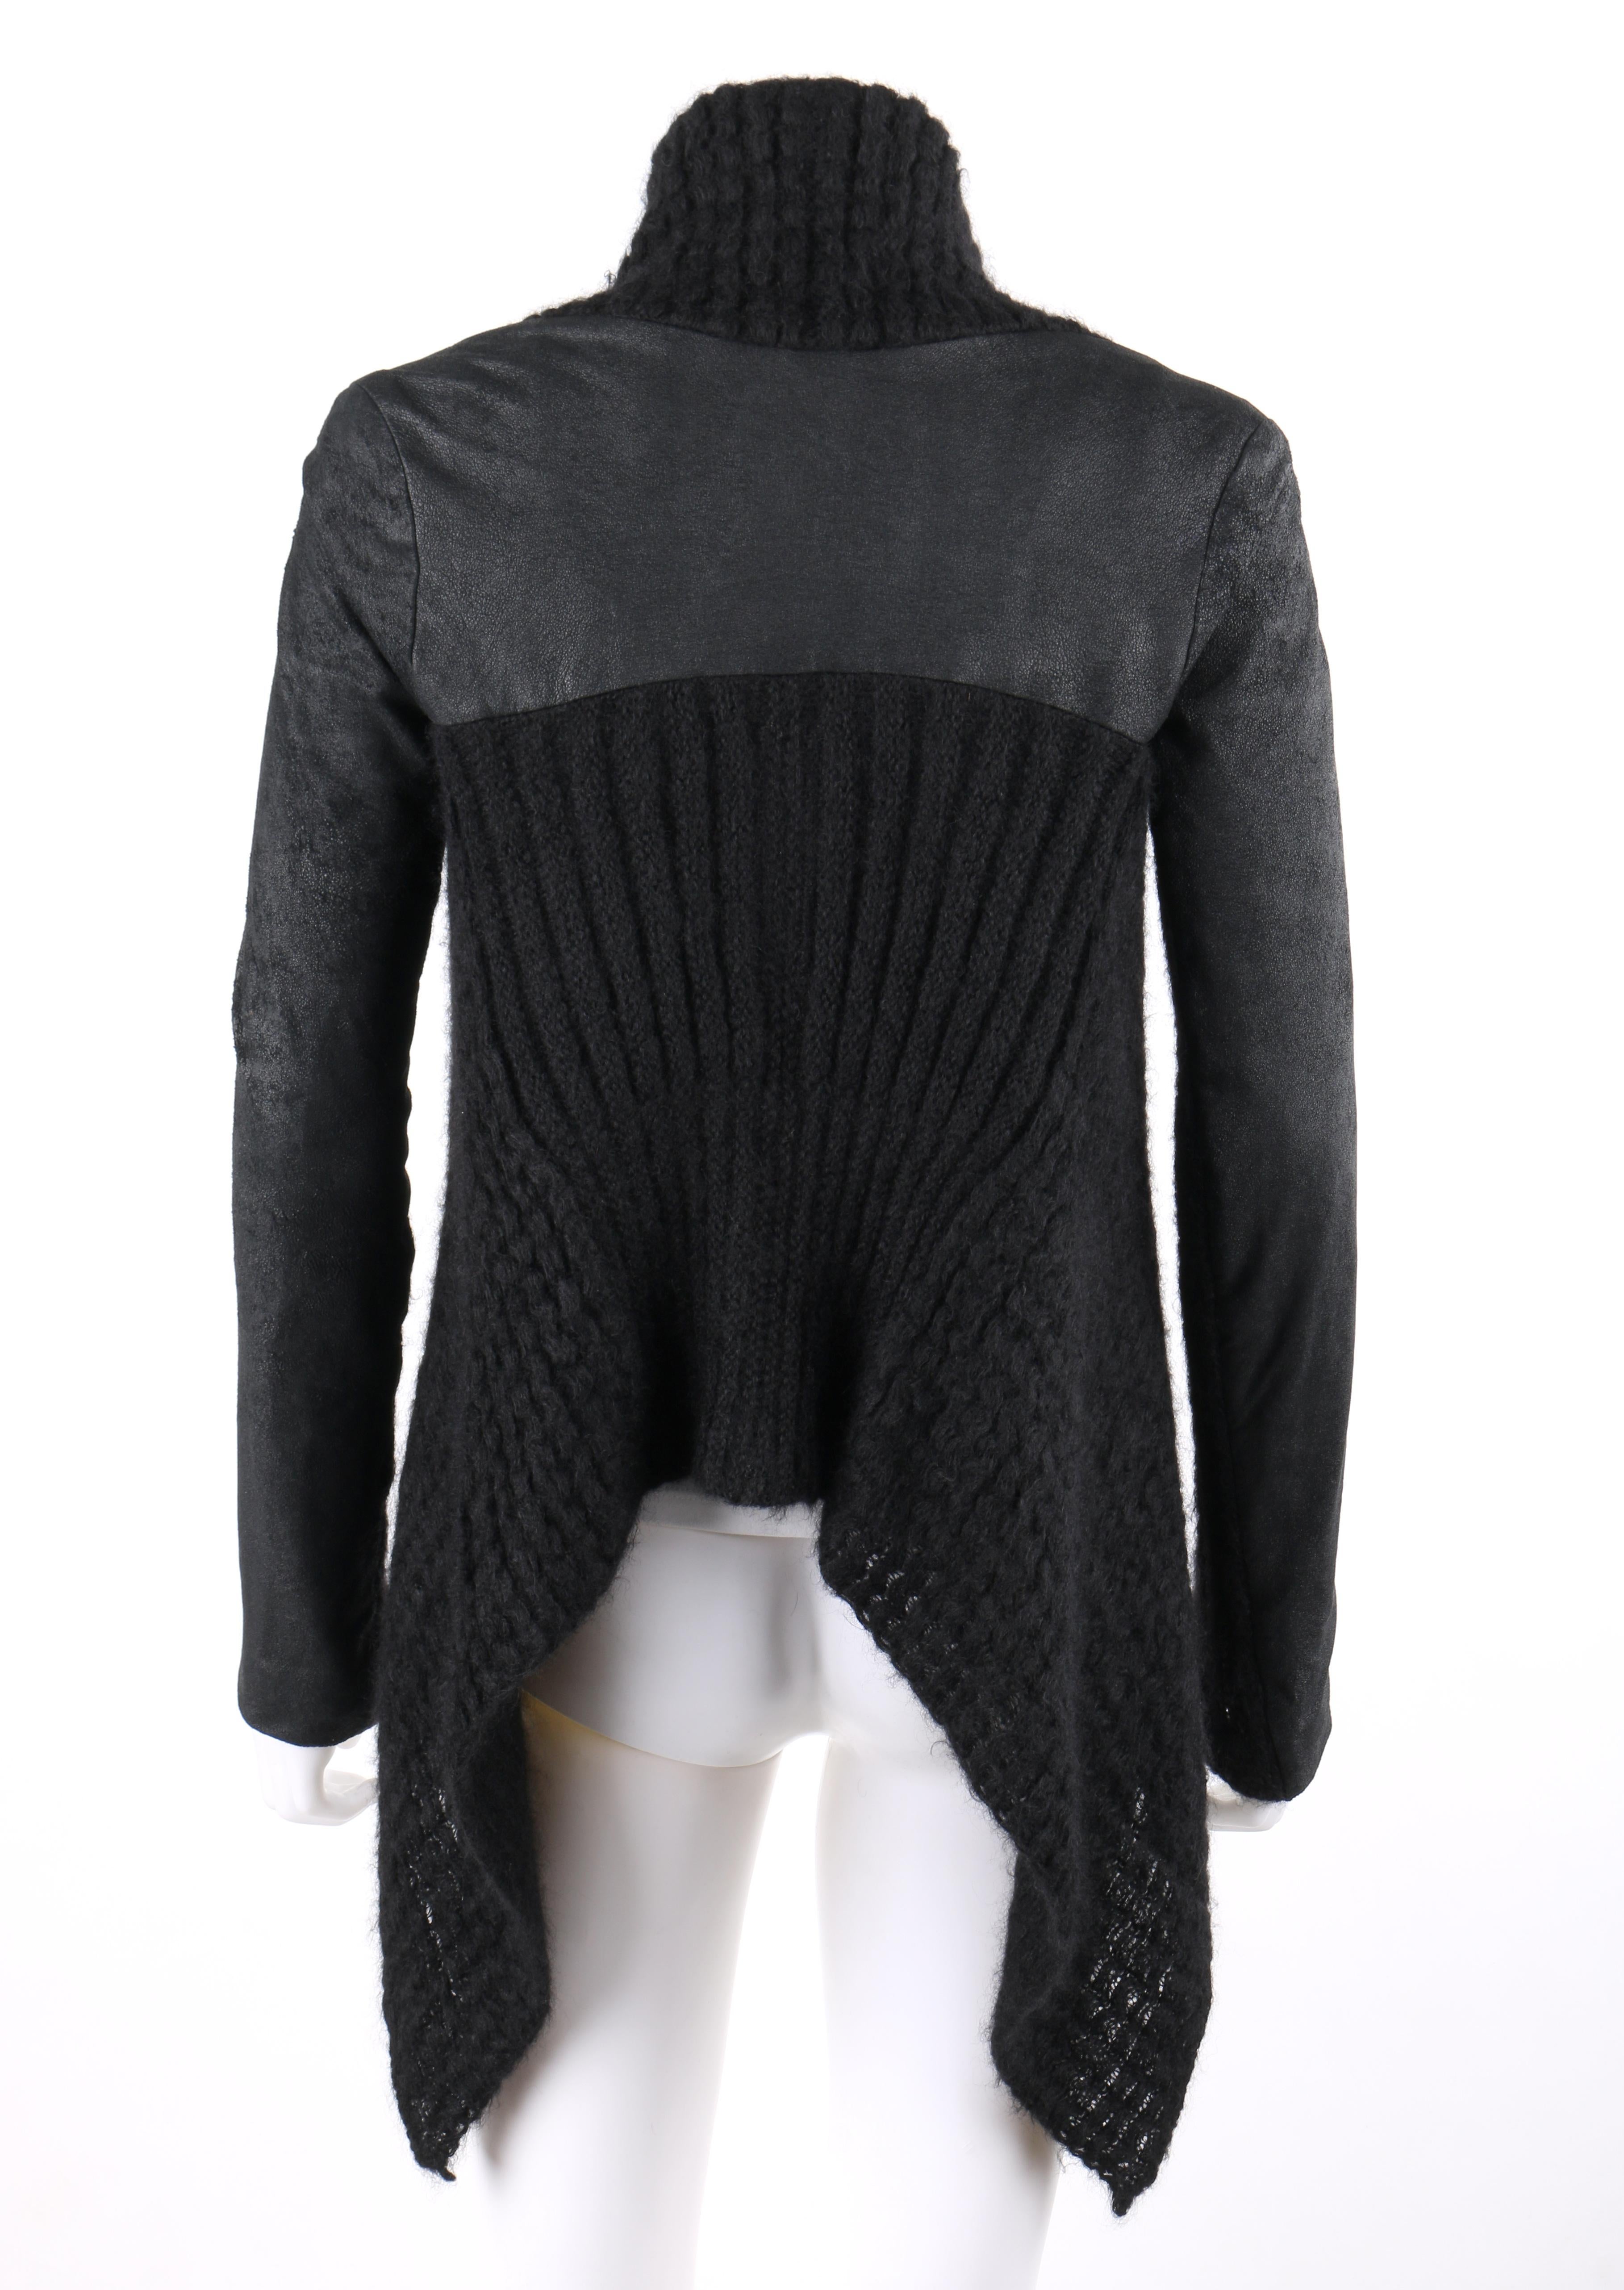 IKRAM RICK OWENS Black Open Waterfall Cardigan Leather Insets Mohair Sweater In Good Condition For Sale In Thiensville, WI